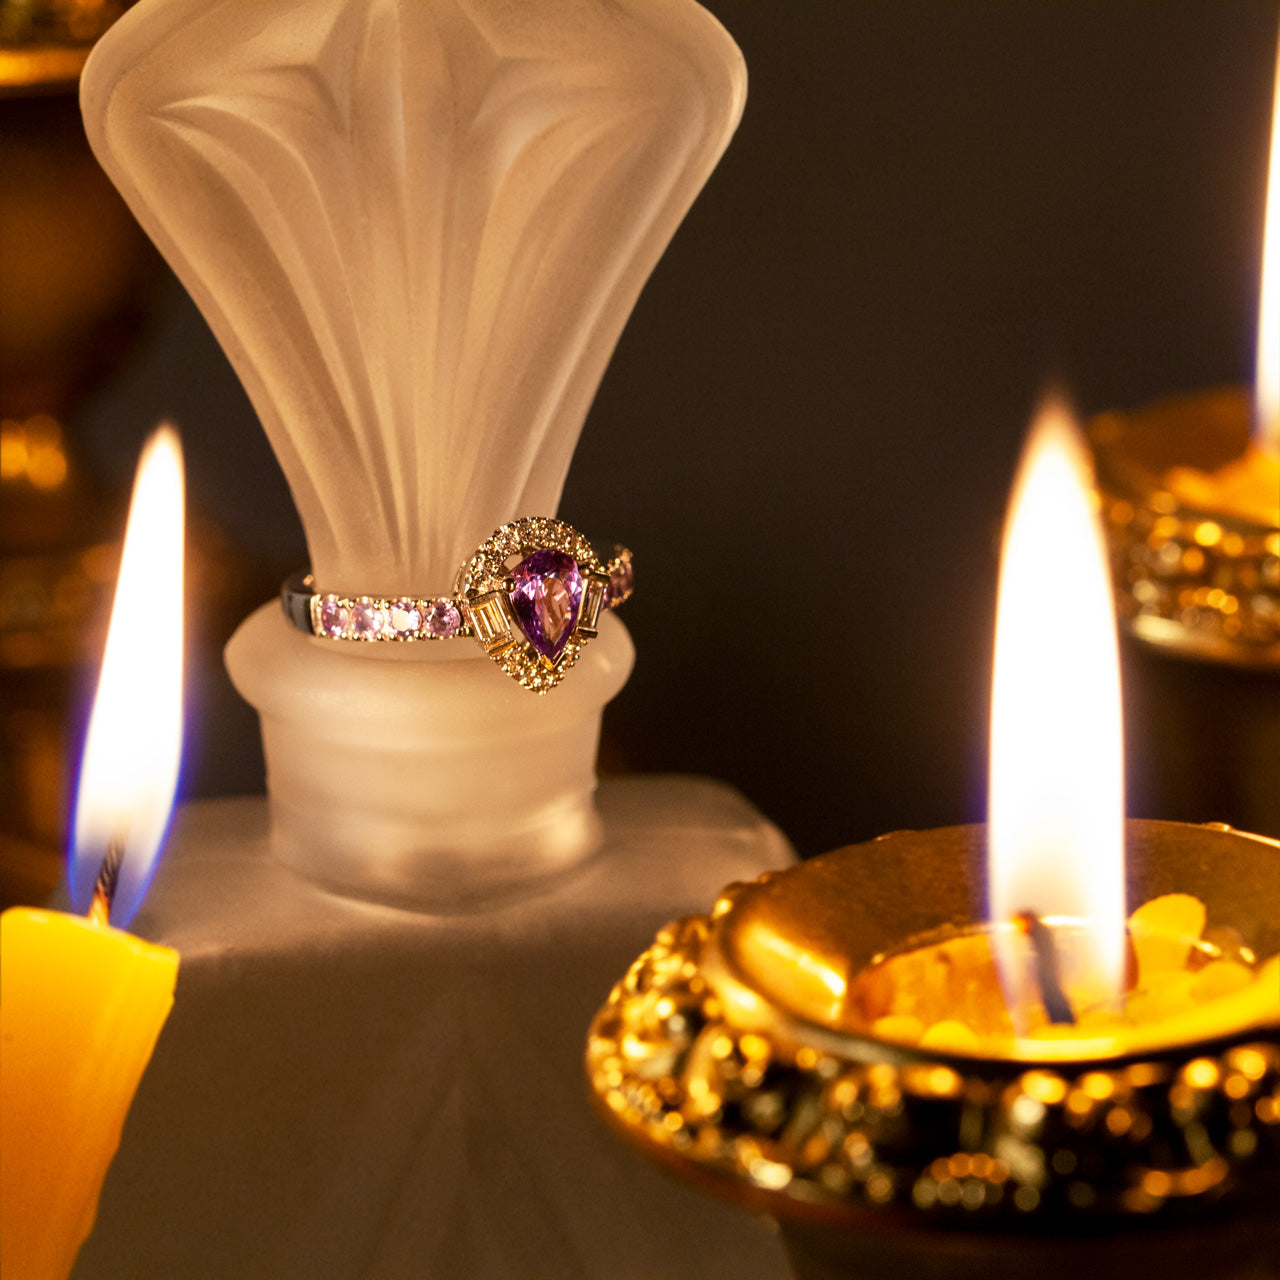 A platinum ring with a 0.57ct alexandrite stone beside a flickering candle